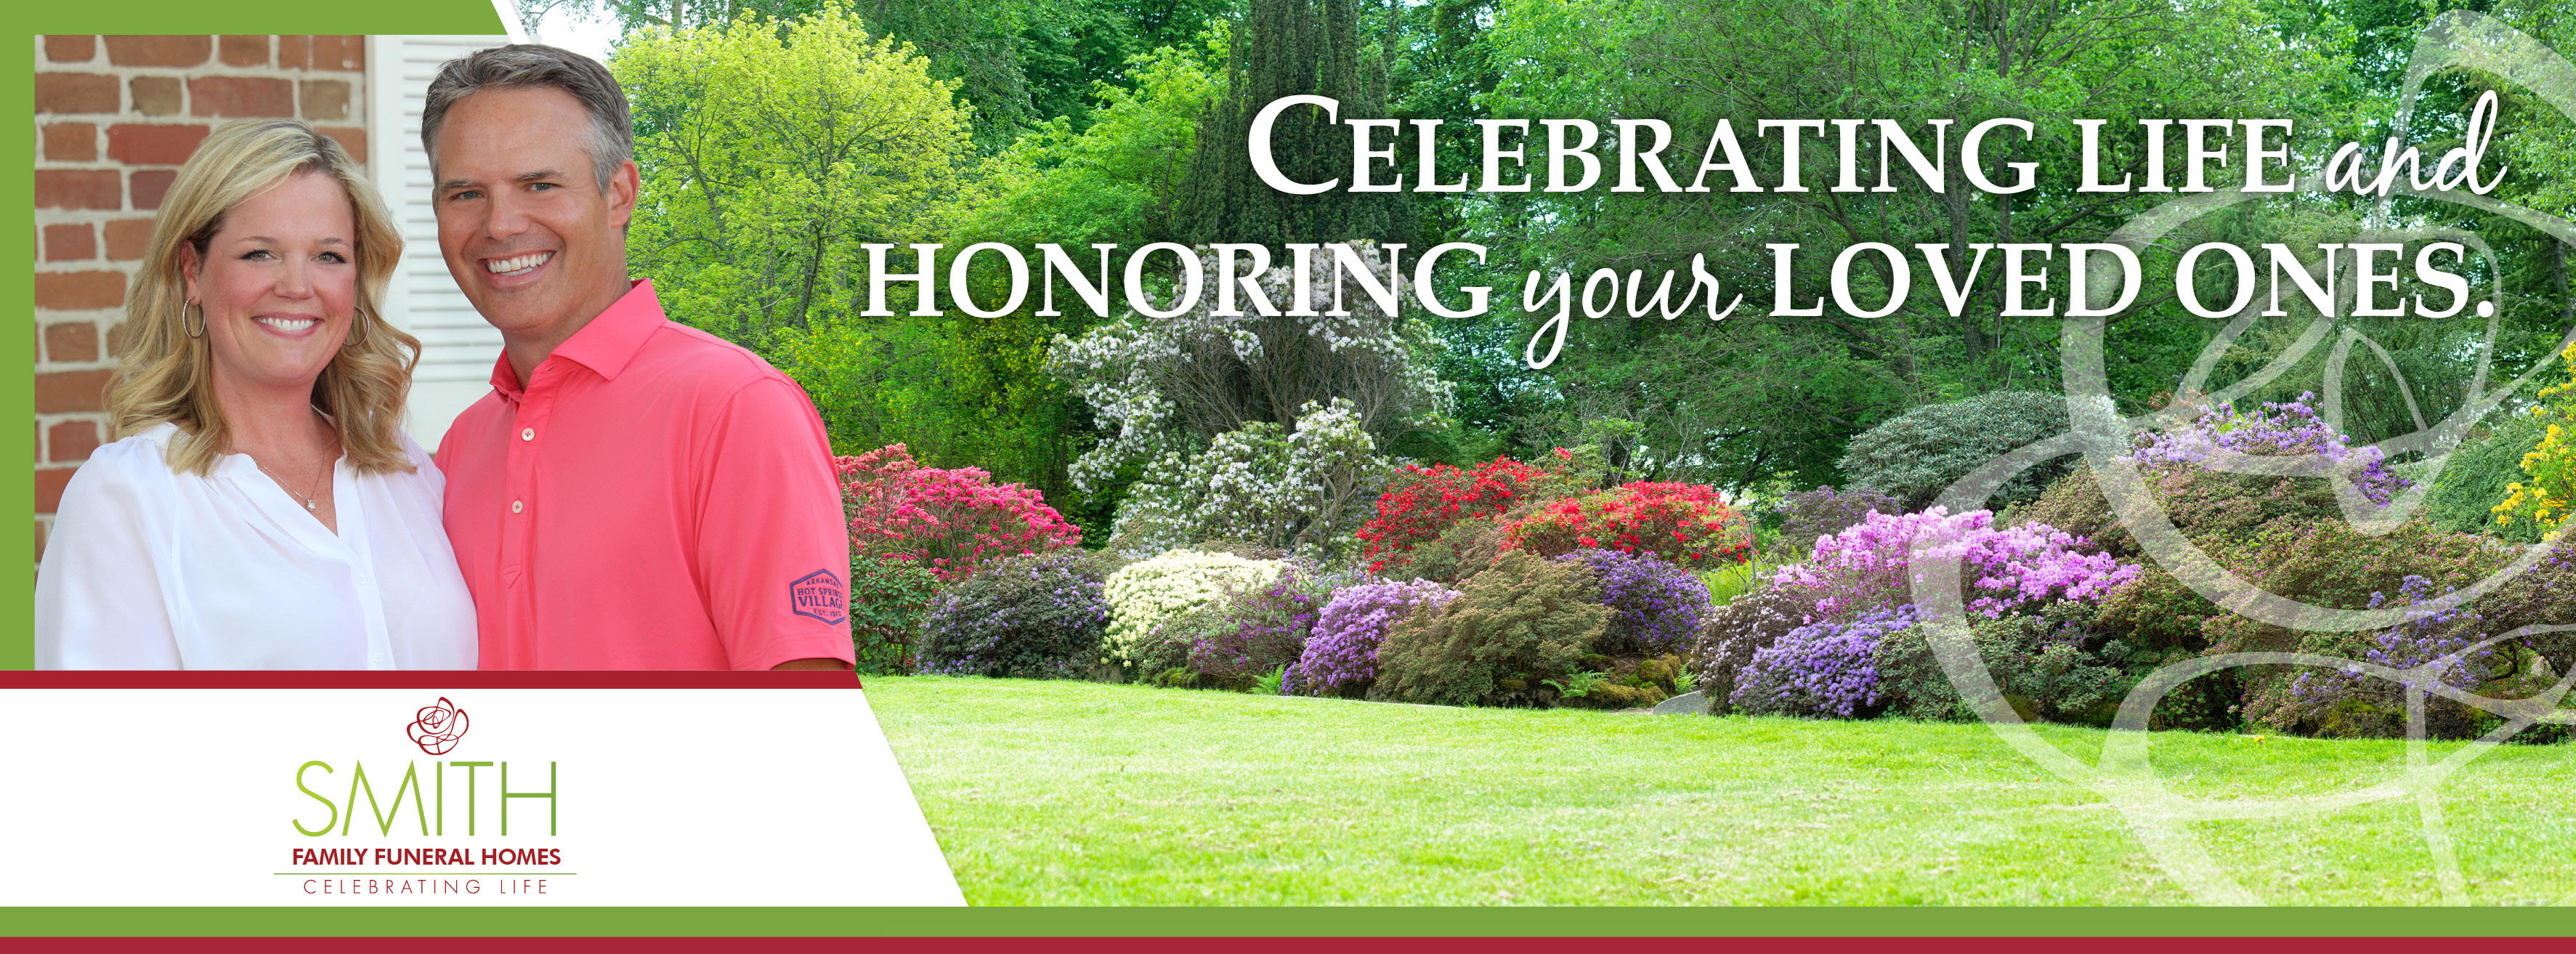 Celebrating life and honoring your loved ones.